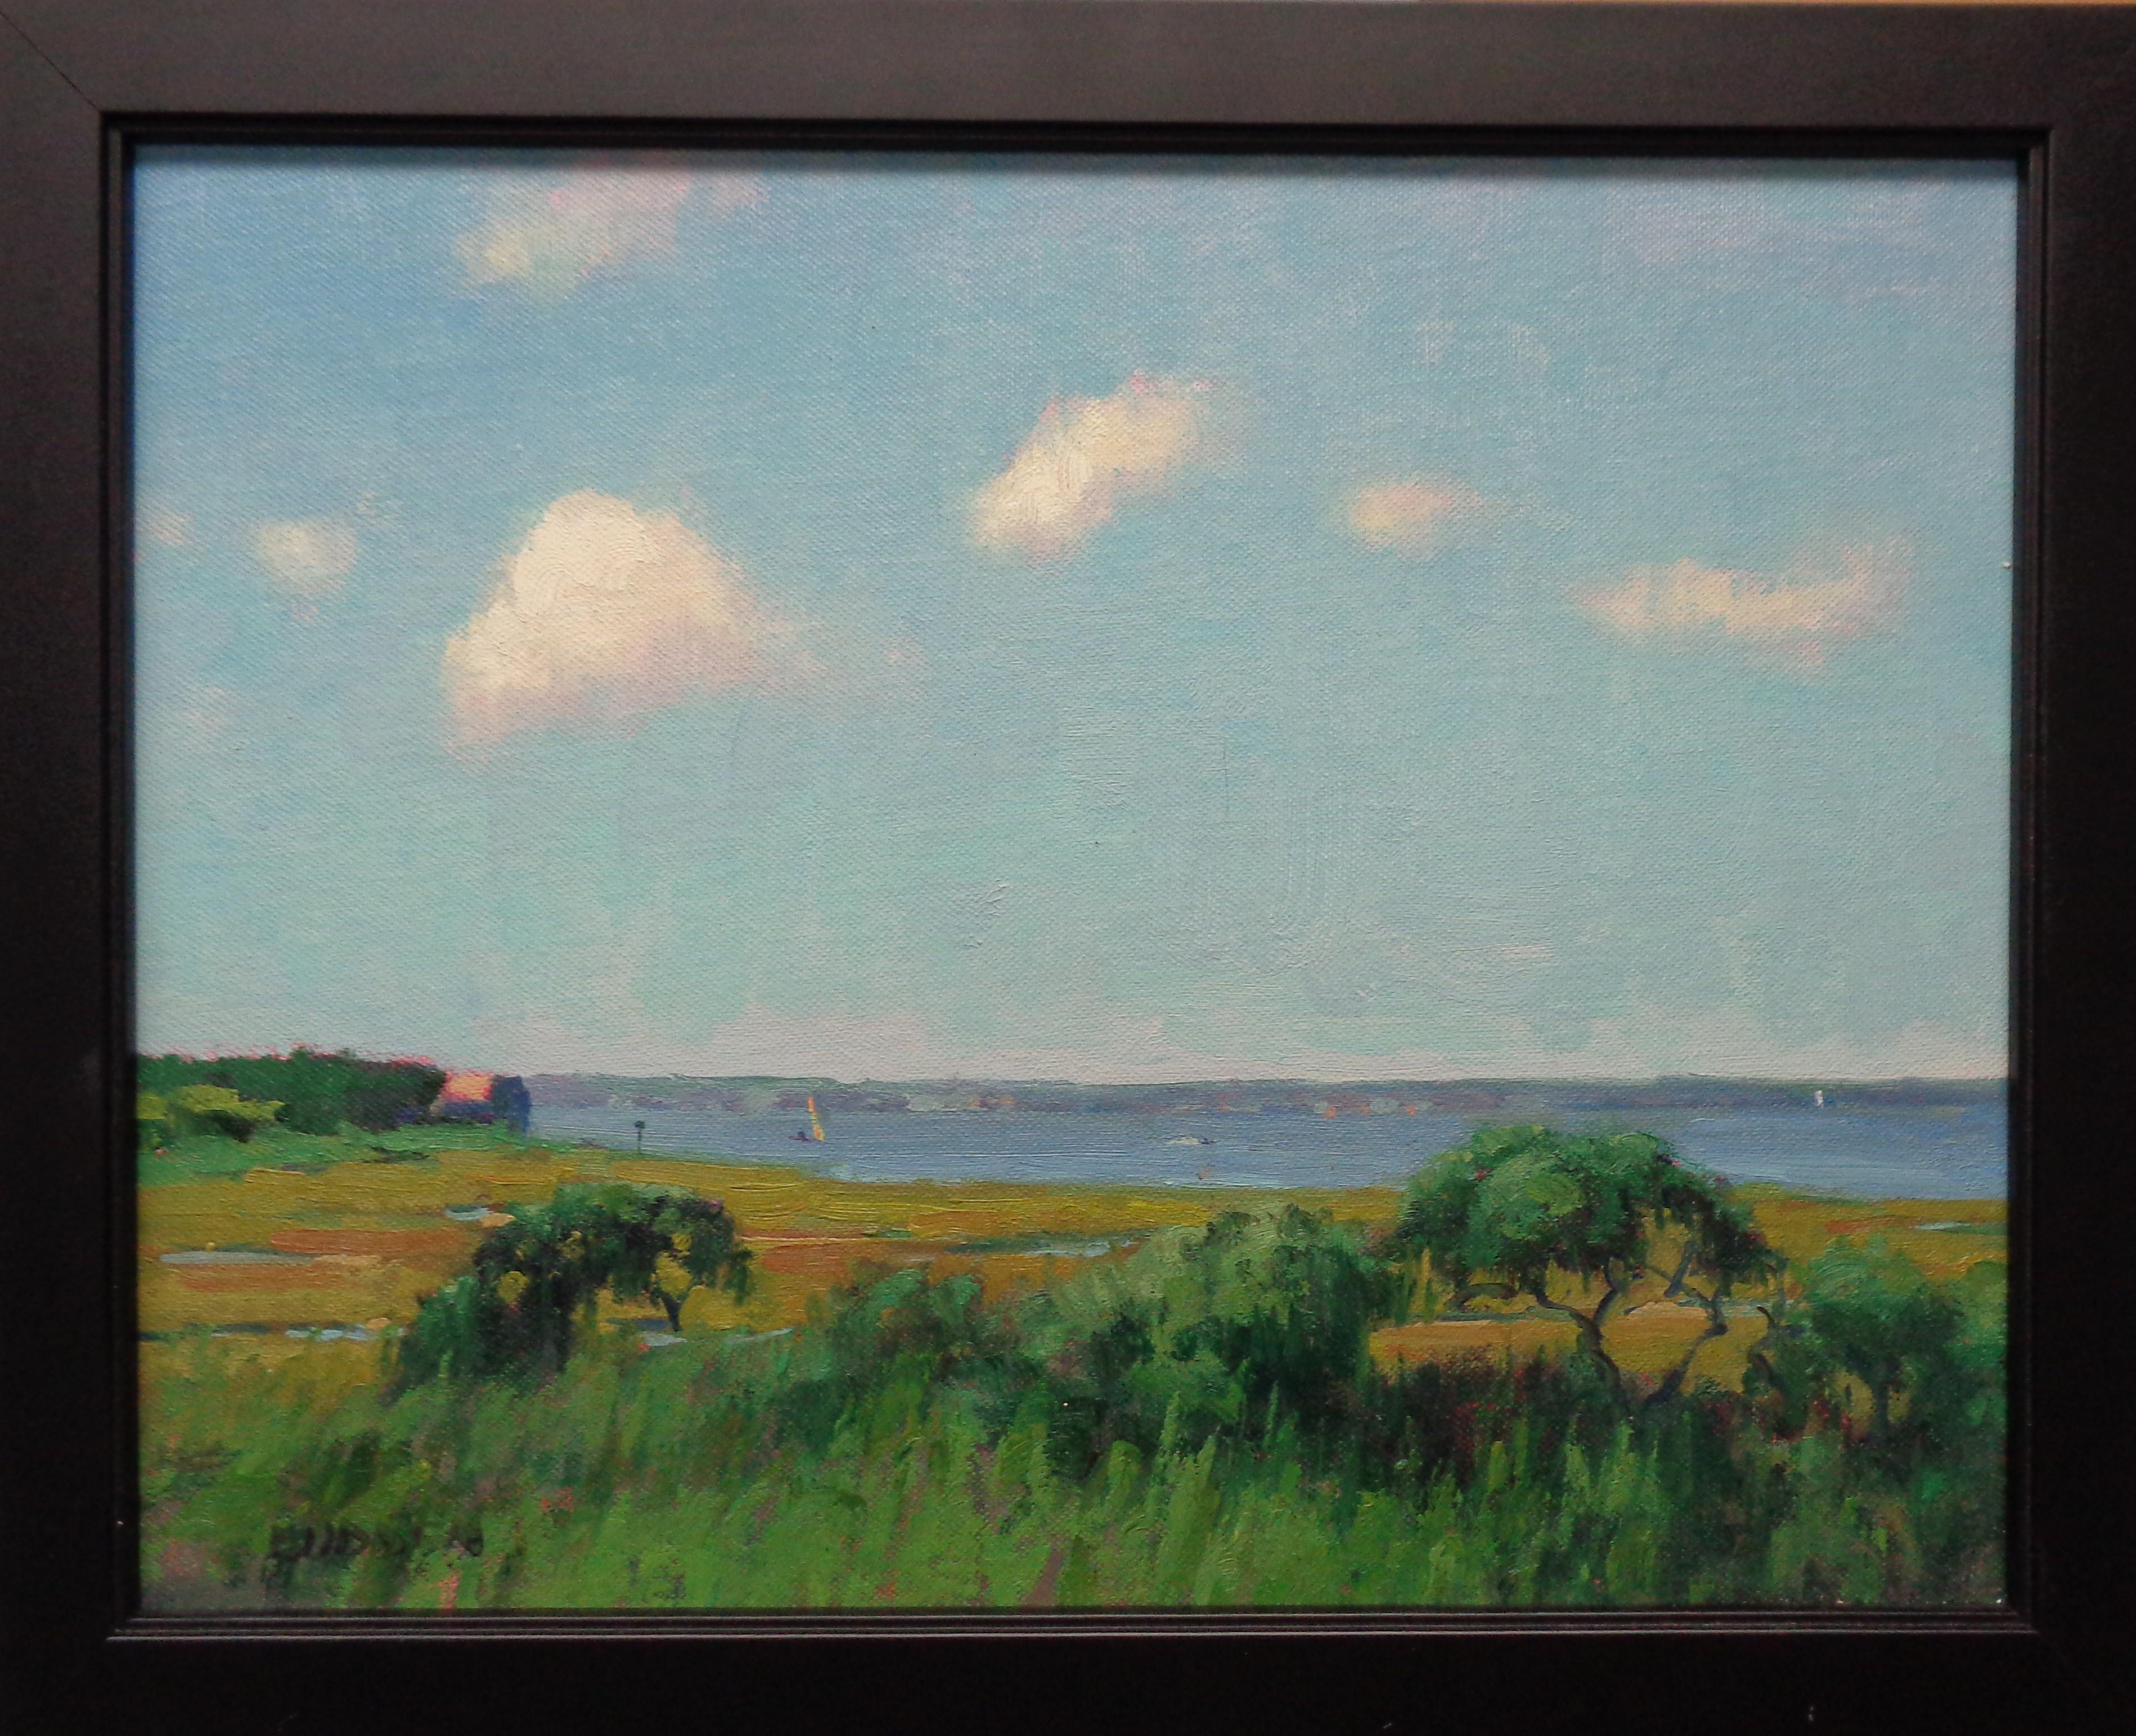 Afternoon Light is an oil painting on canvas by award winning contemporary artist Michael Budden that showcases a beautiful afternoon on the marsh looking at the bay with boats.  This painting is in great shape but the frame shows some wear as it is